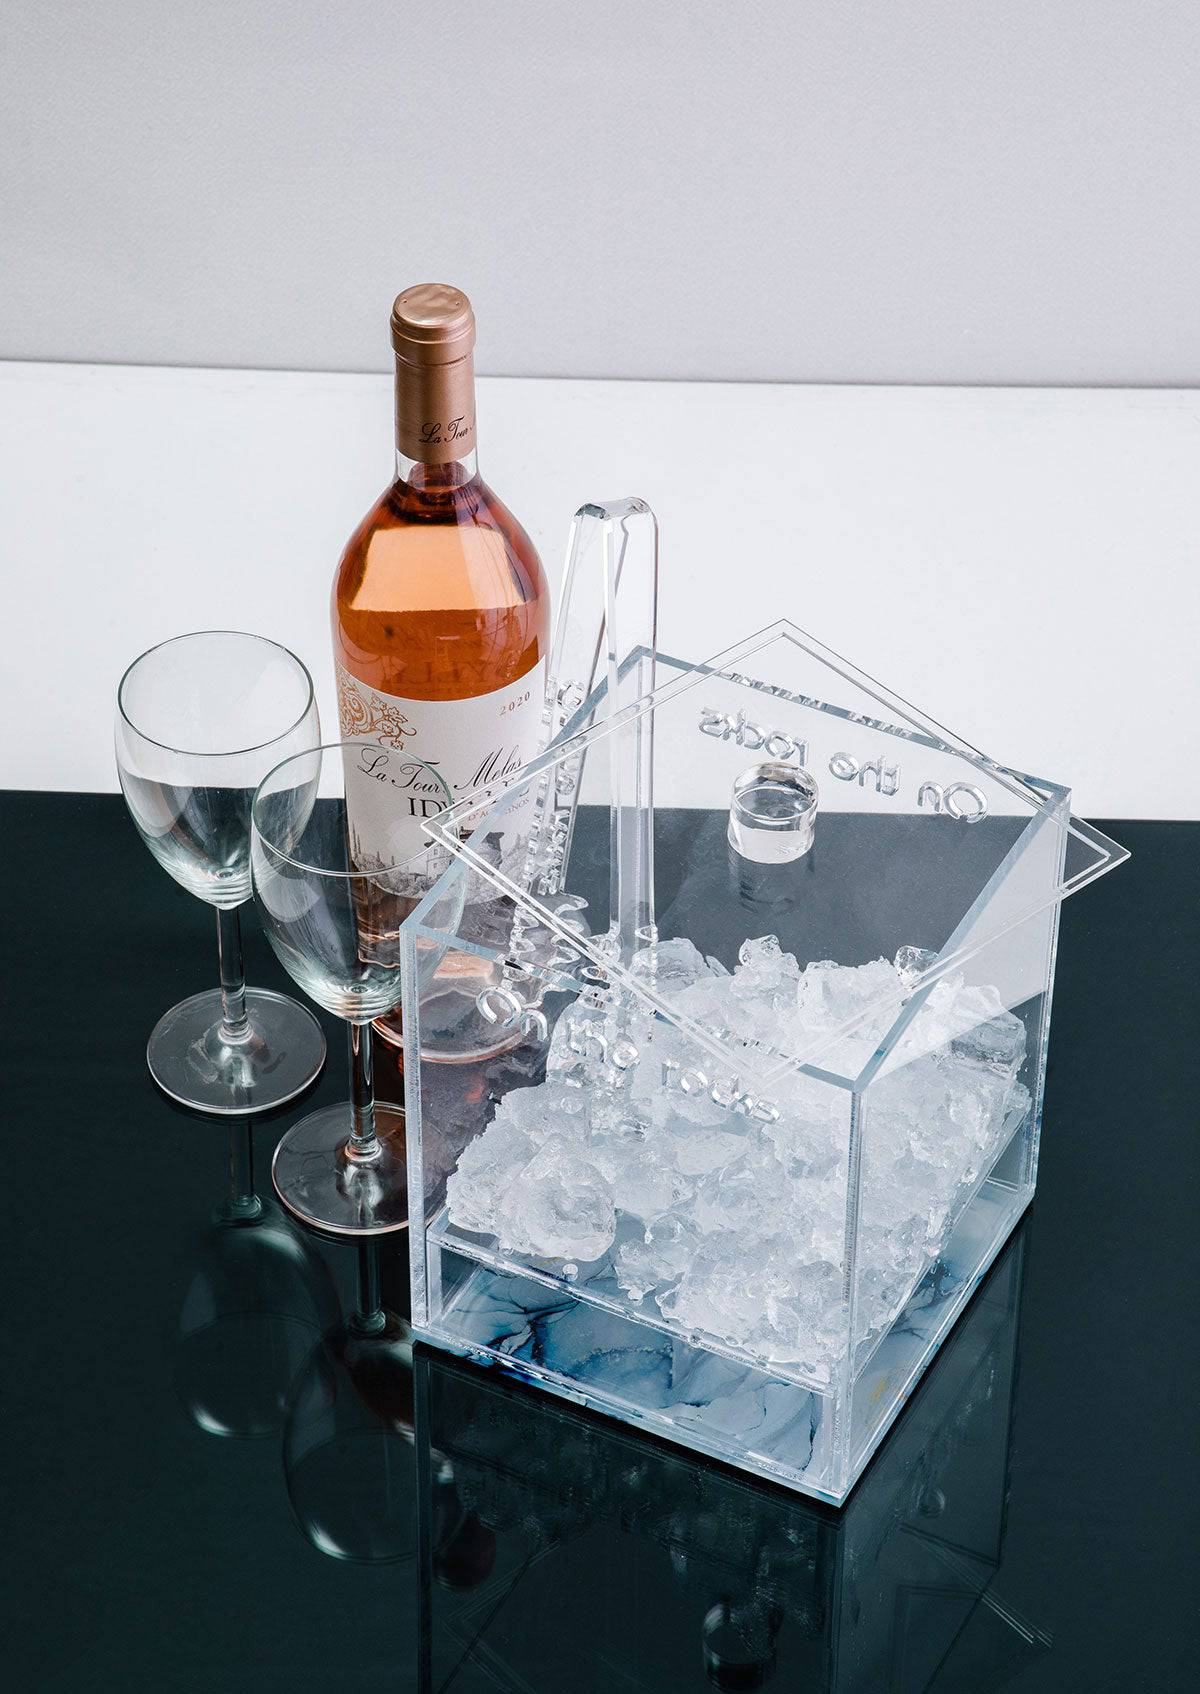 ICE Cooler Box | Clear Marble On the Rocks